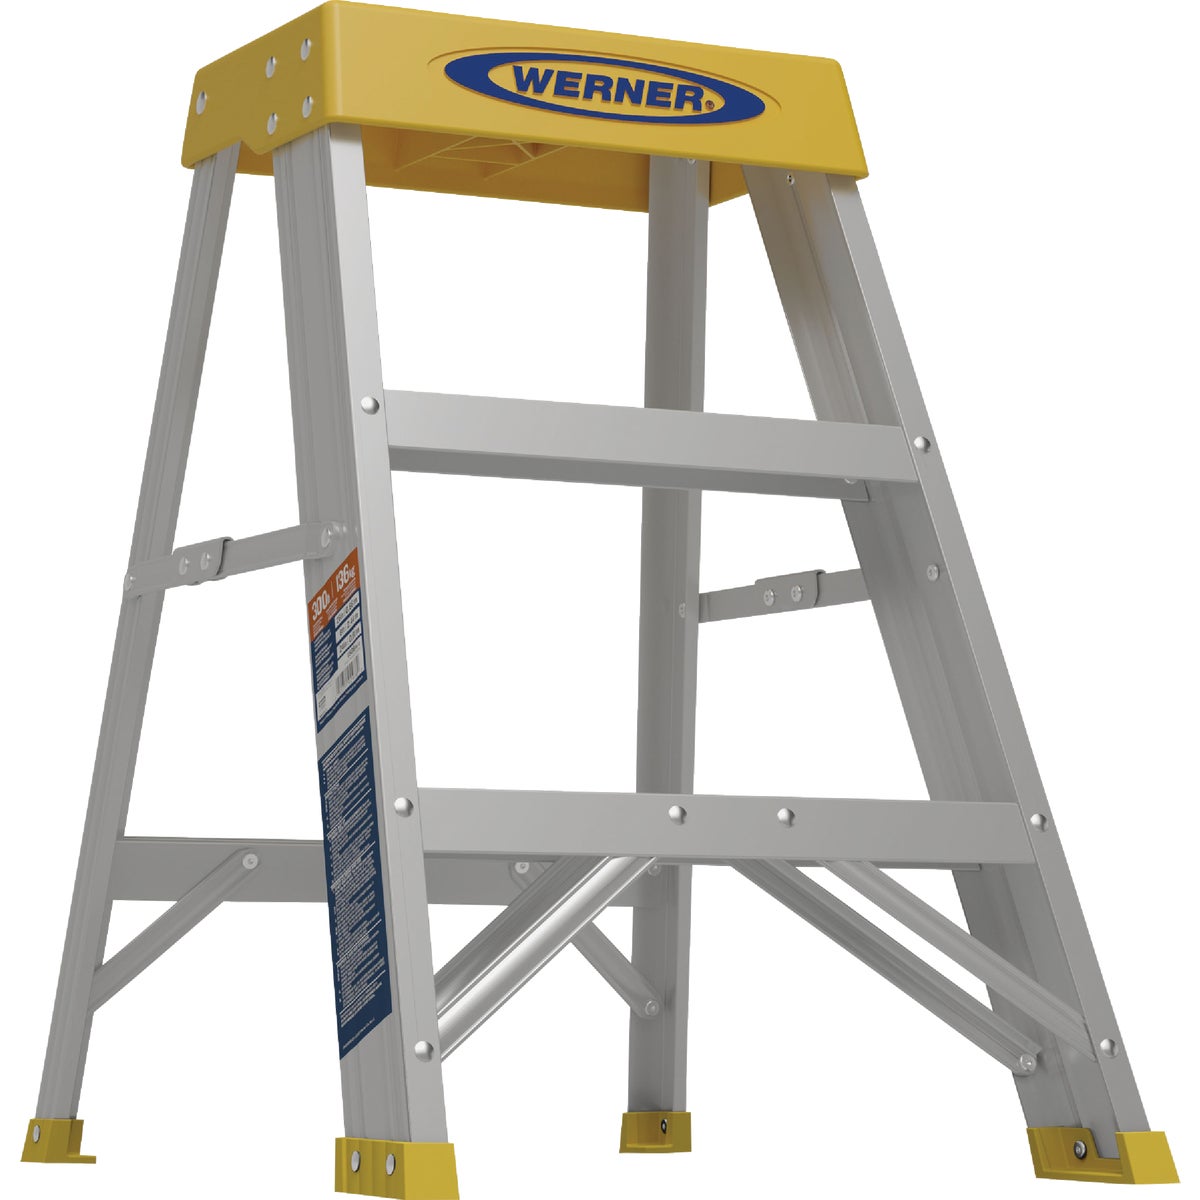 Item 774549, Industrial grade step stool that is perfect for most plant, office, and 